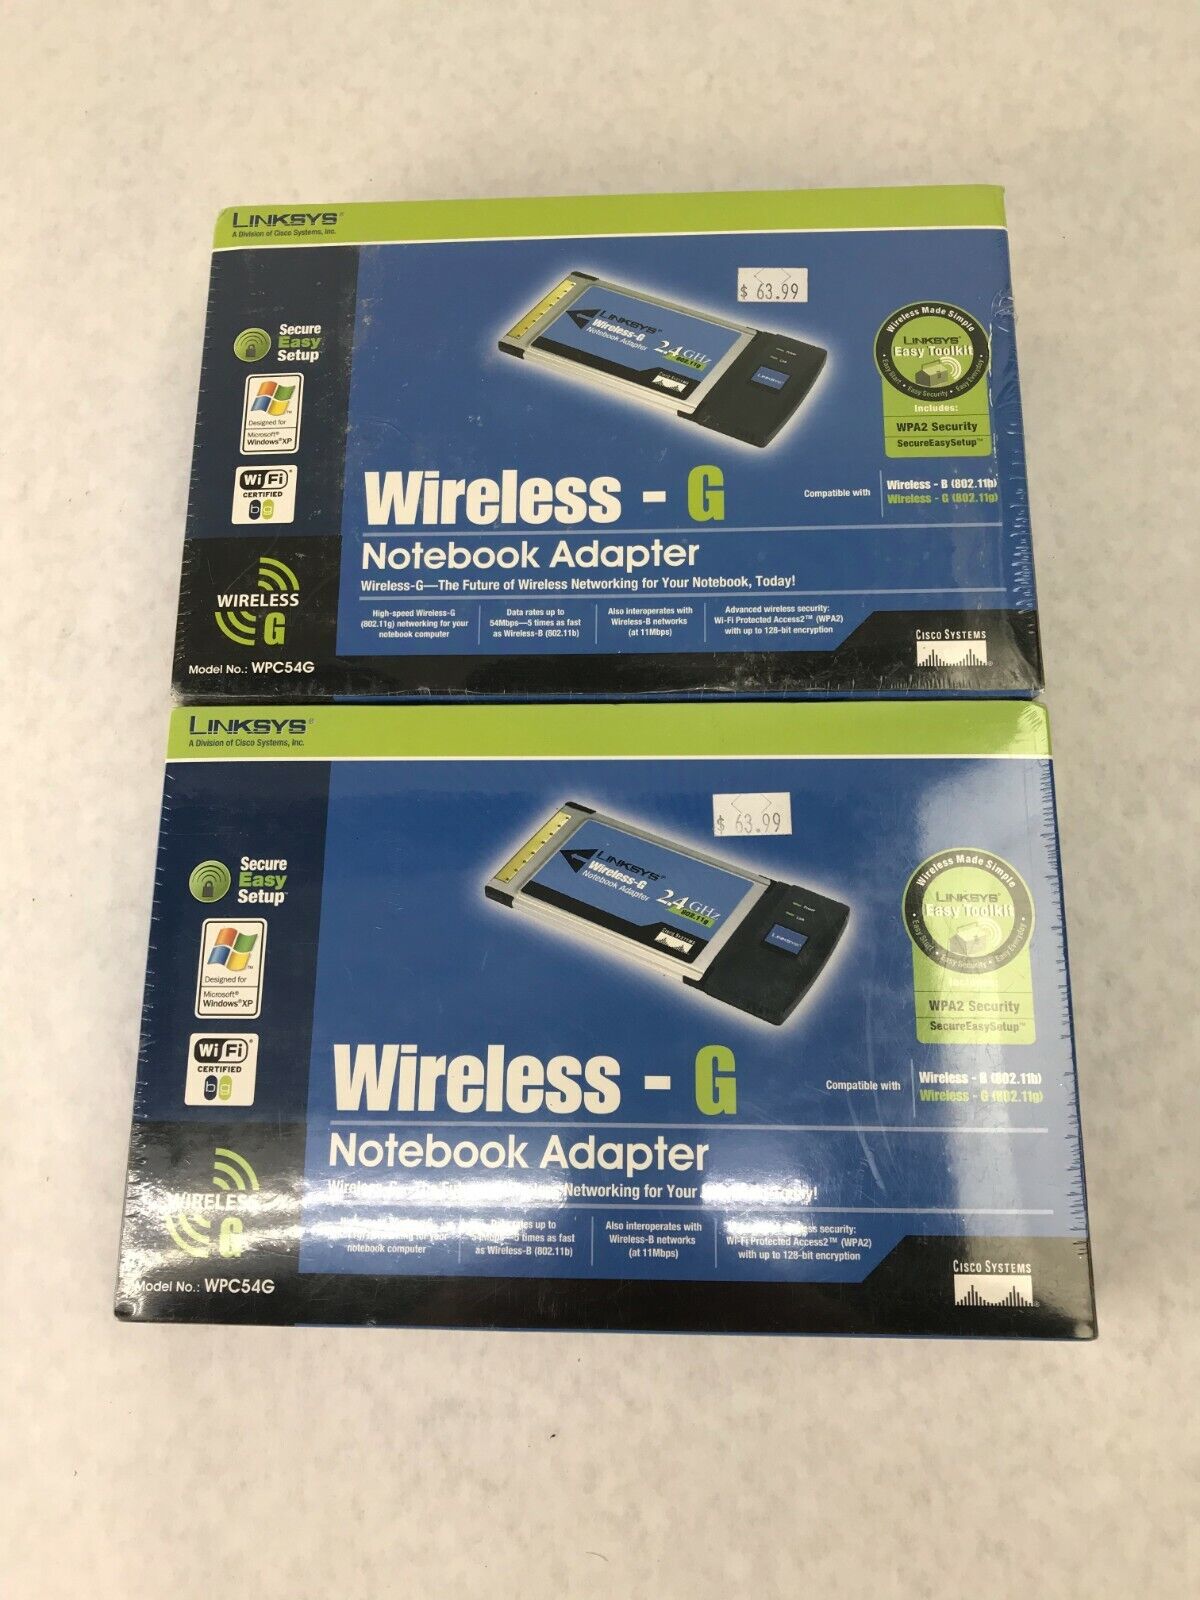 Lot of 2 Linksys Wireless G Notebook Adapter Cisco Systems WPC54G Factory Sealed